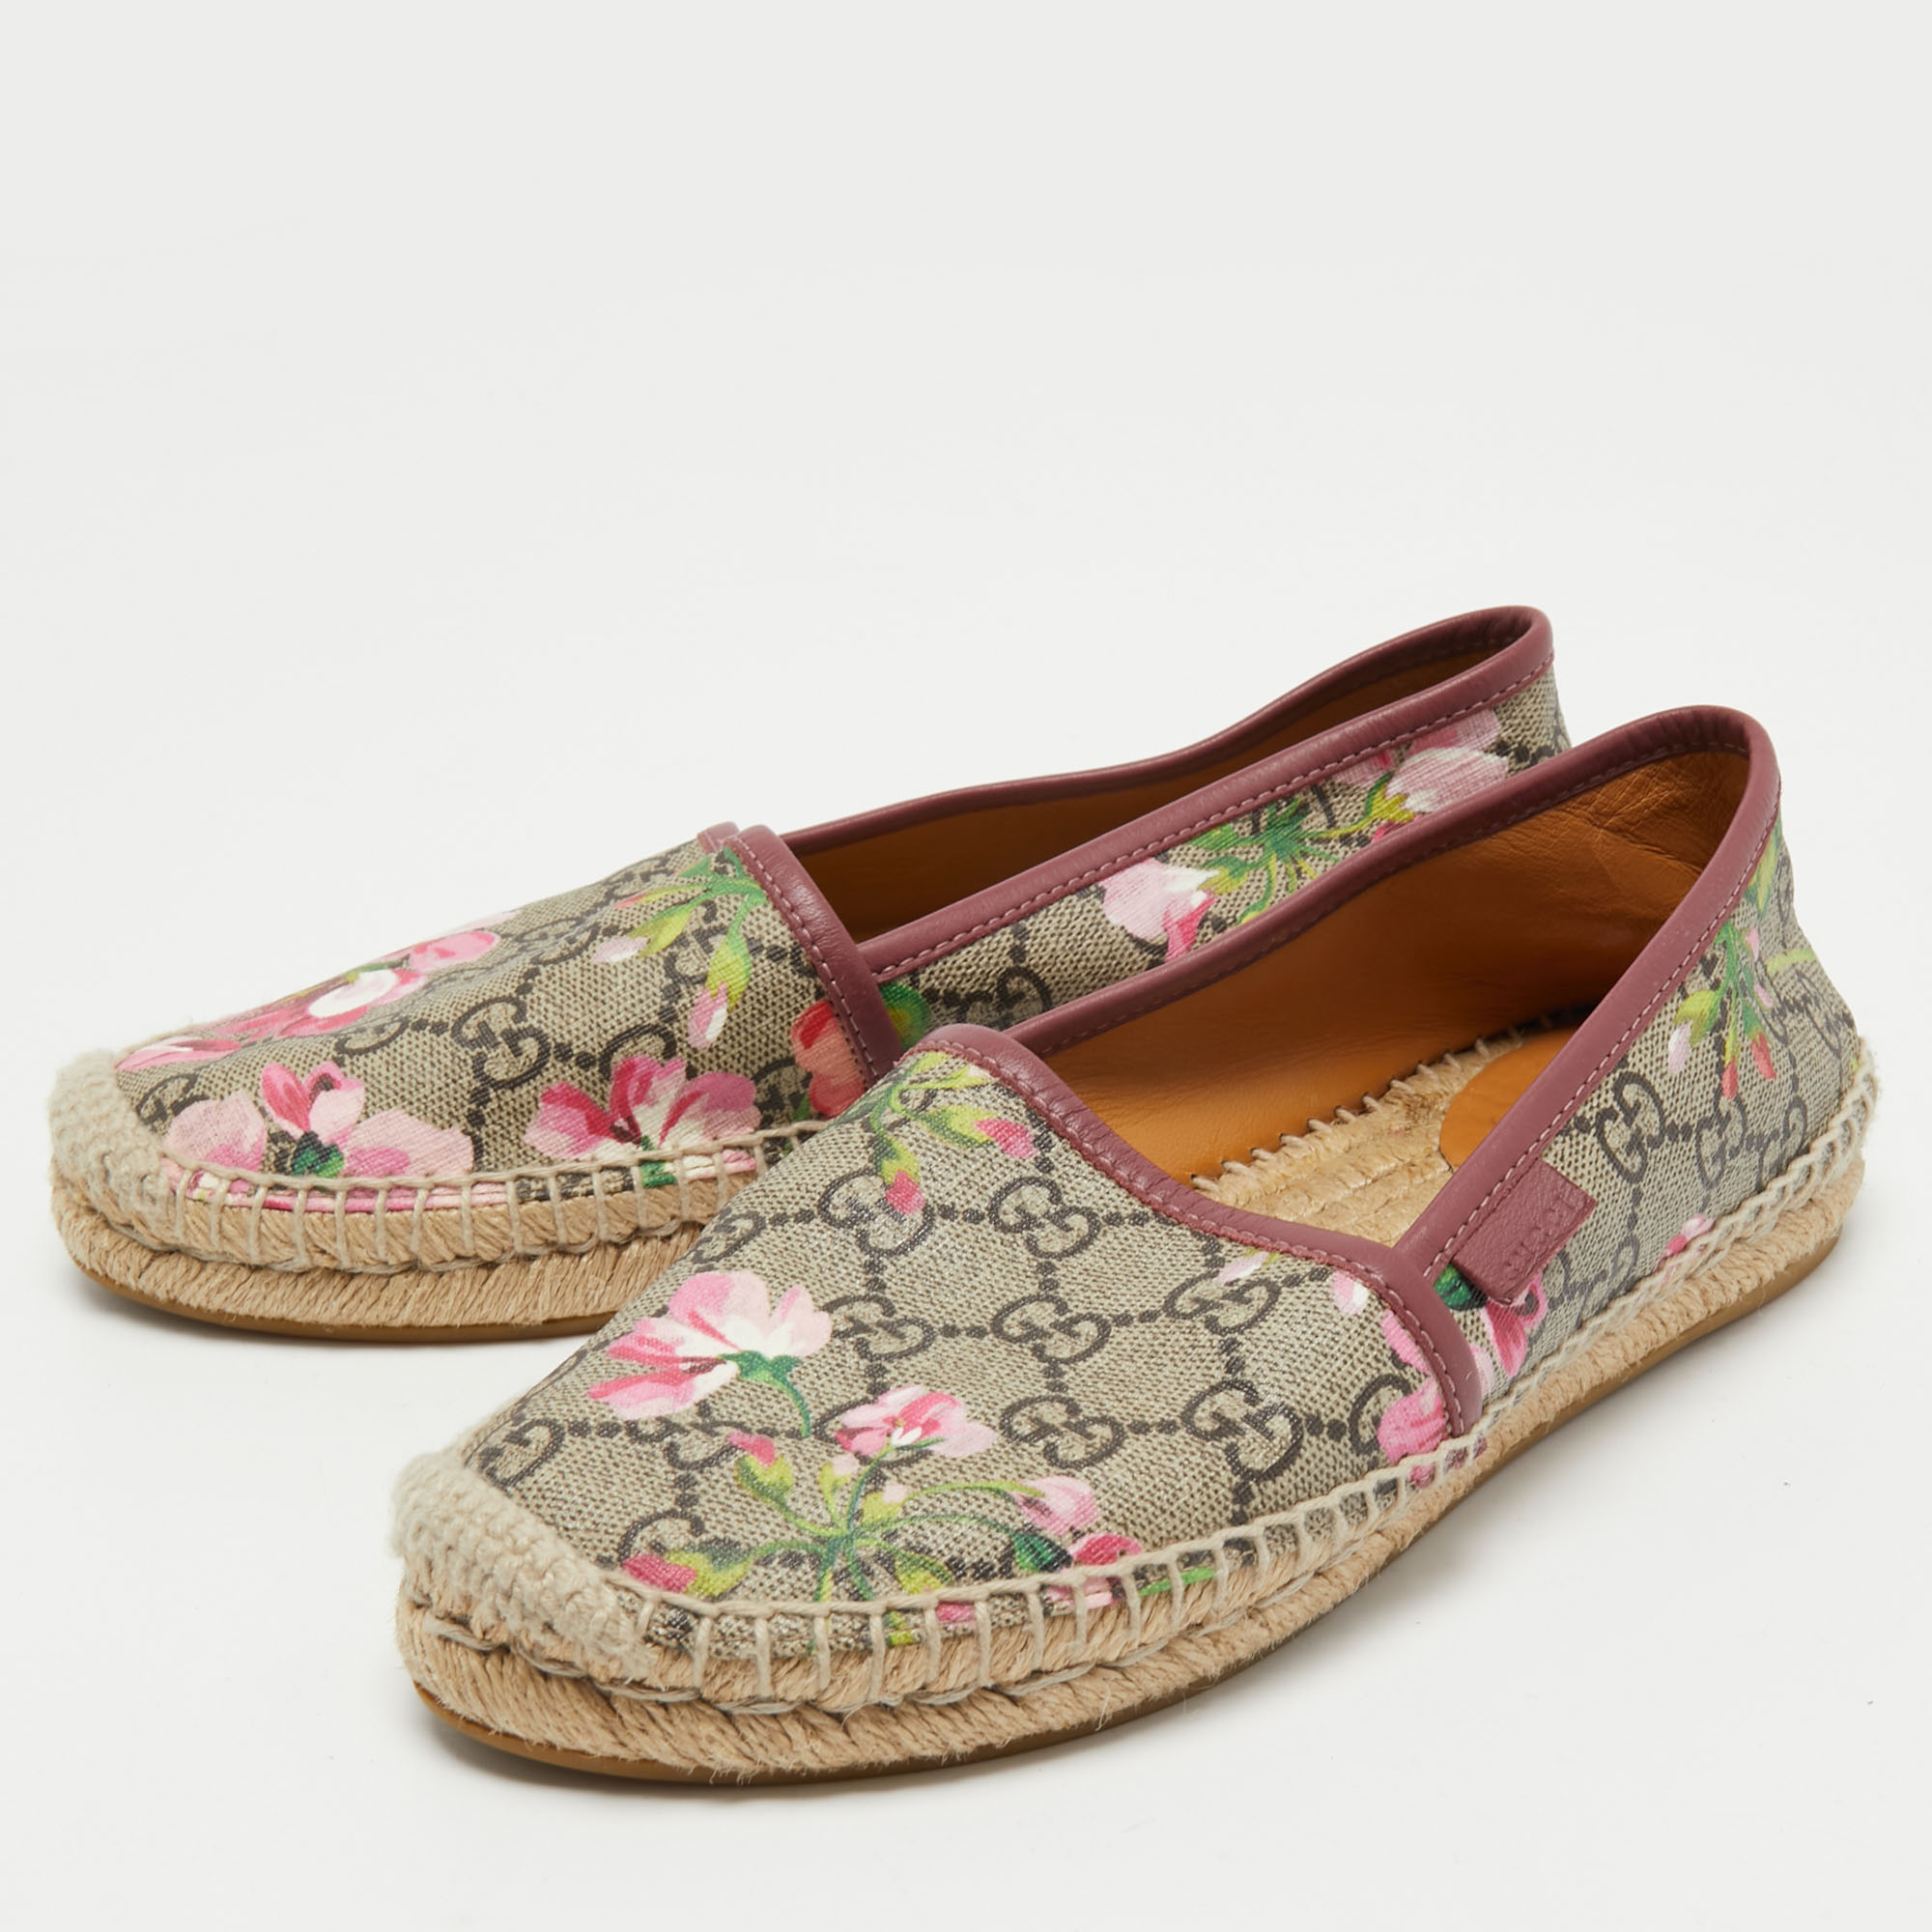 

Gucci Multicolor Tian Print GG Supreme Canvas and Leather Flat Espadrilles Size